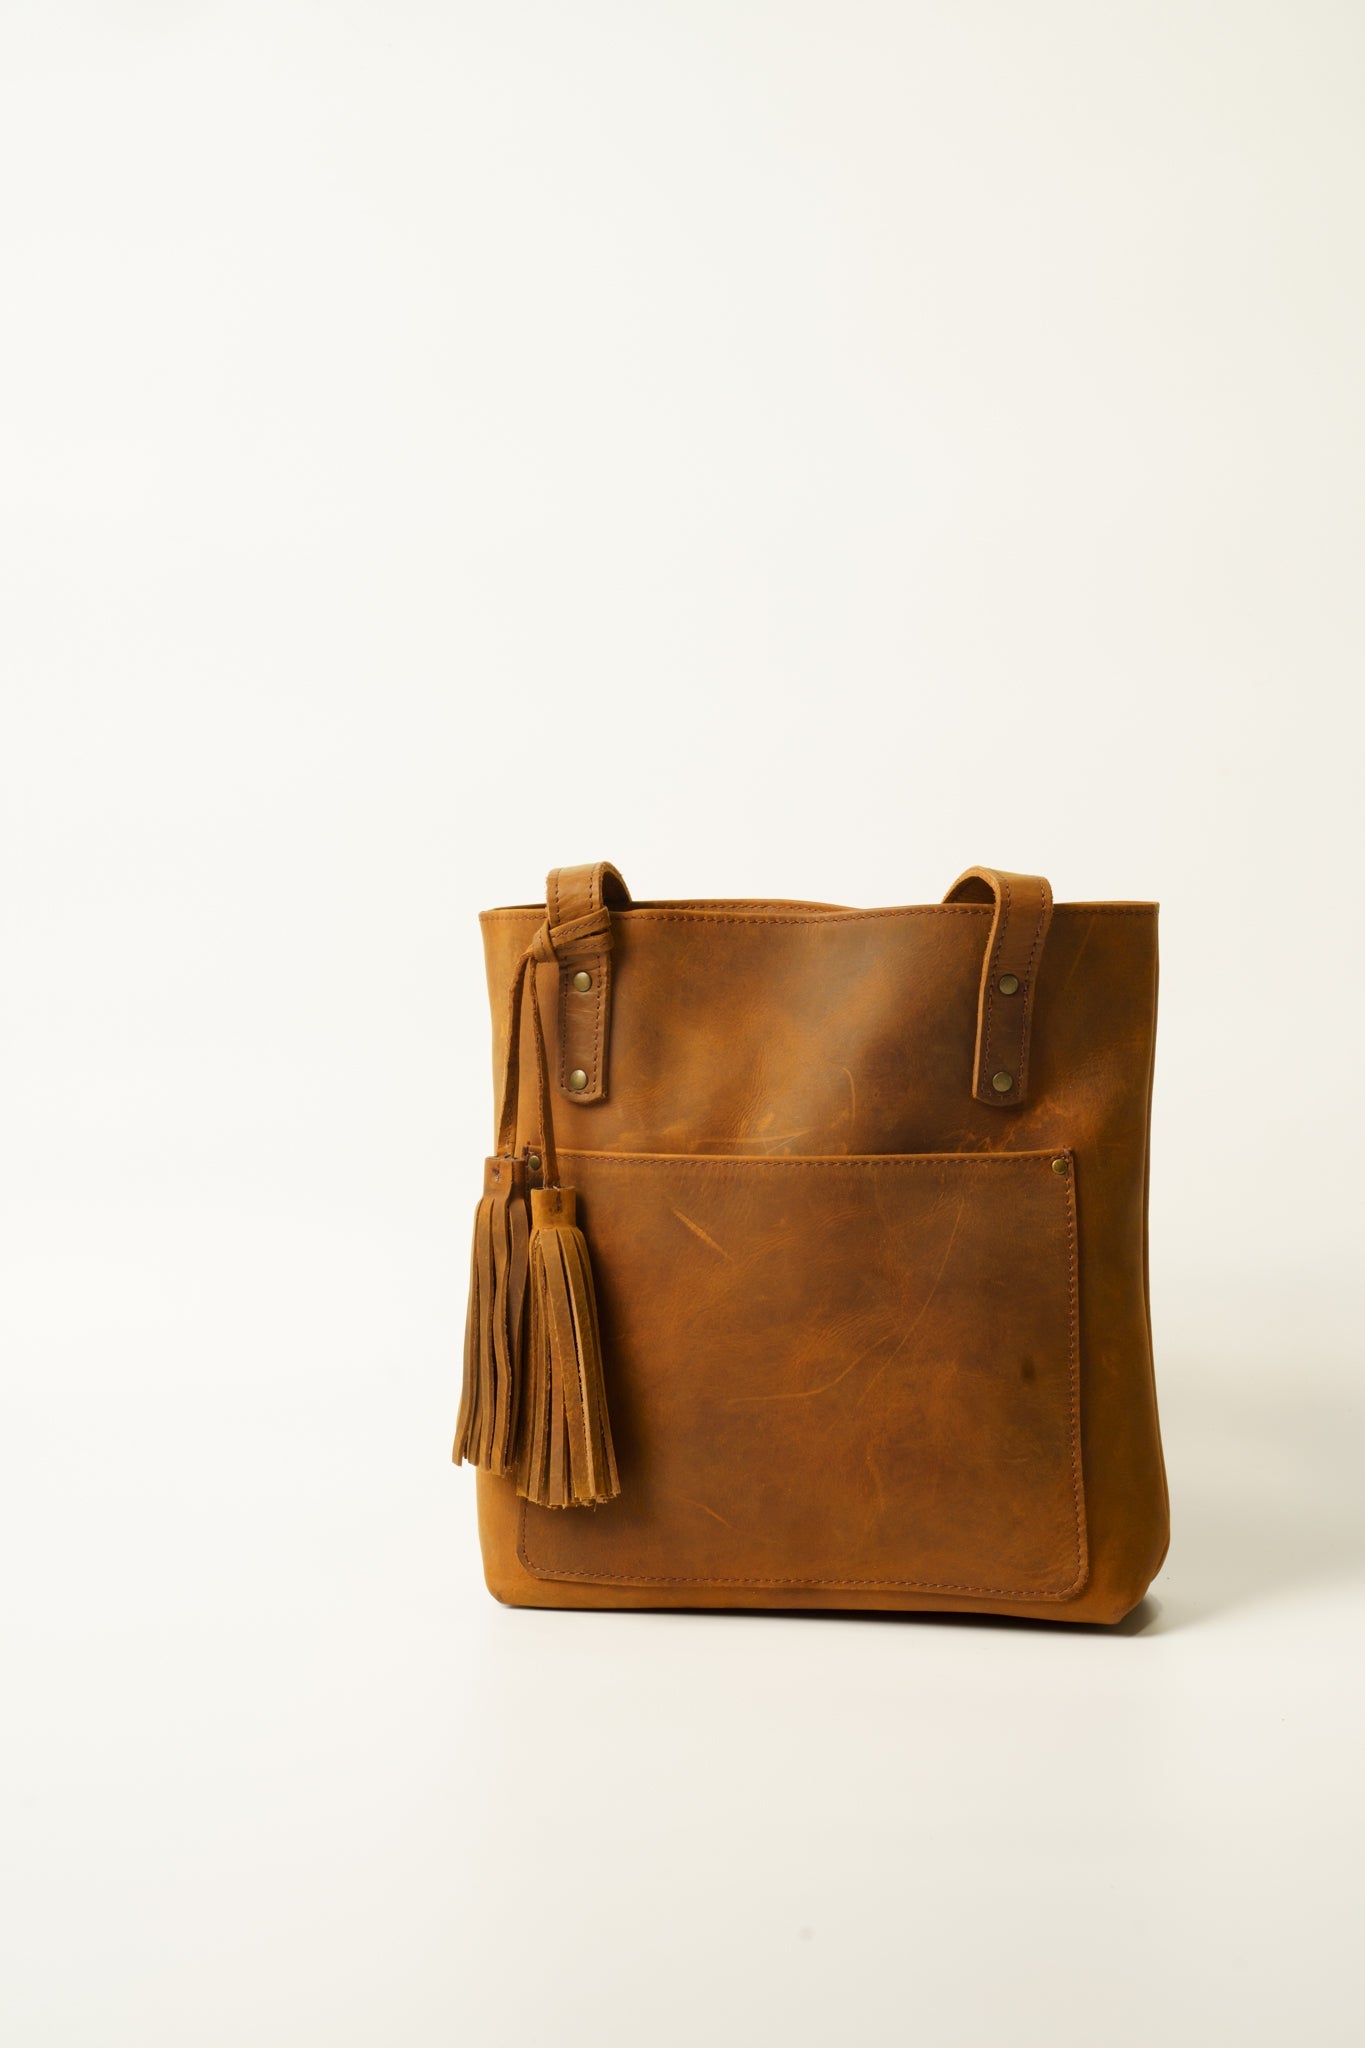 Leather Tote Bag for Women - Light Brown